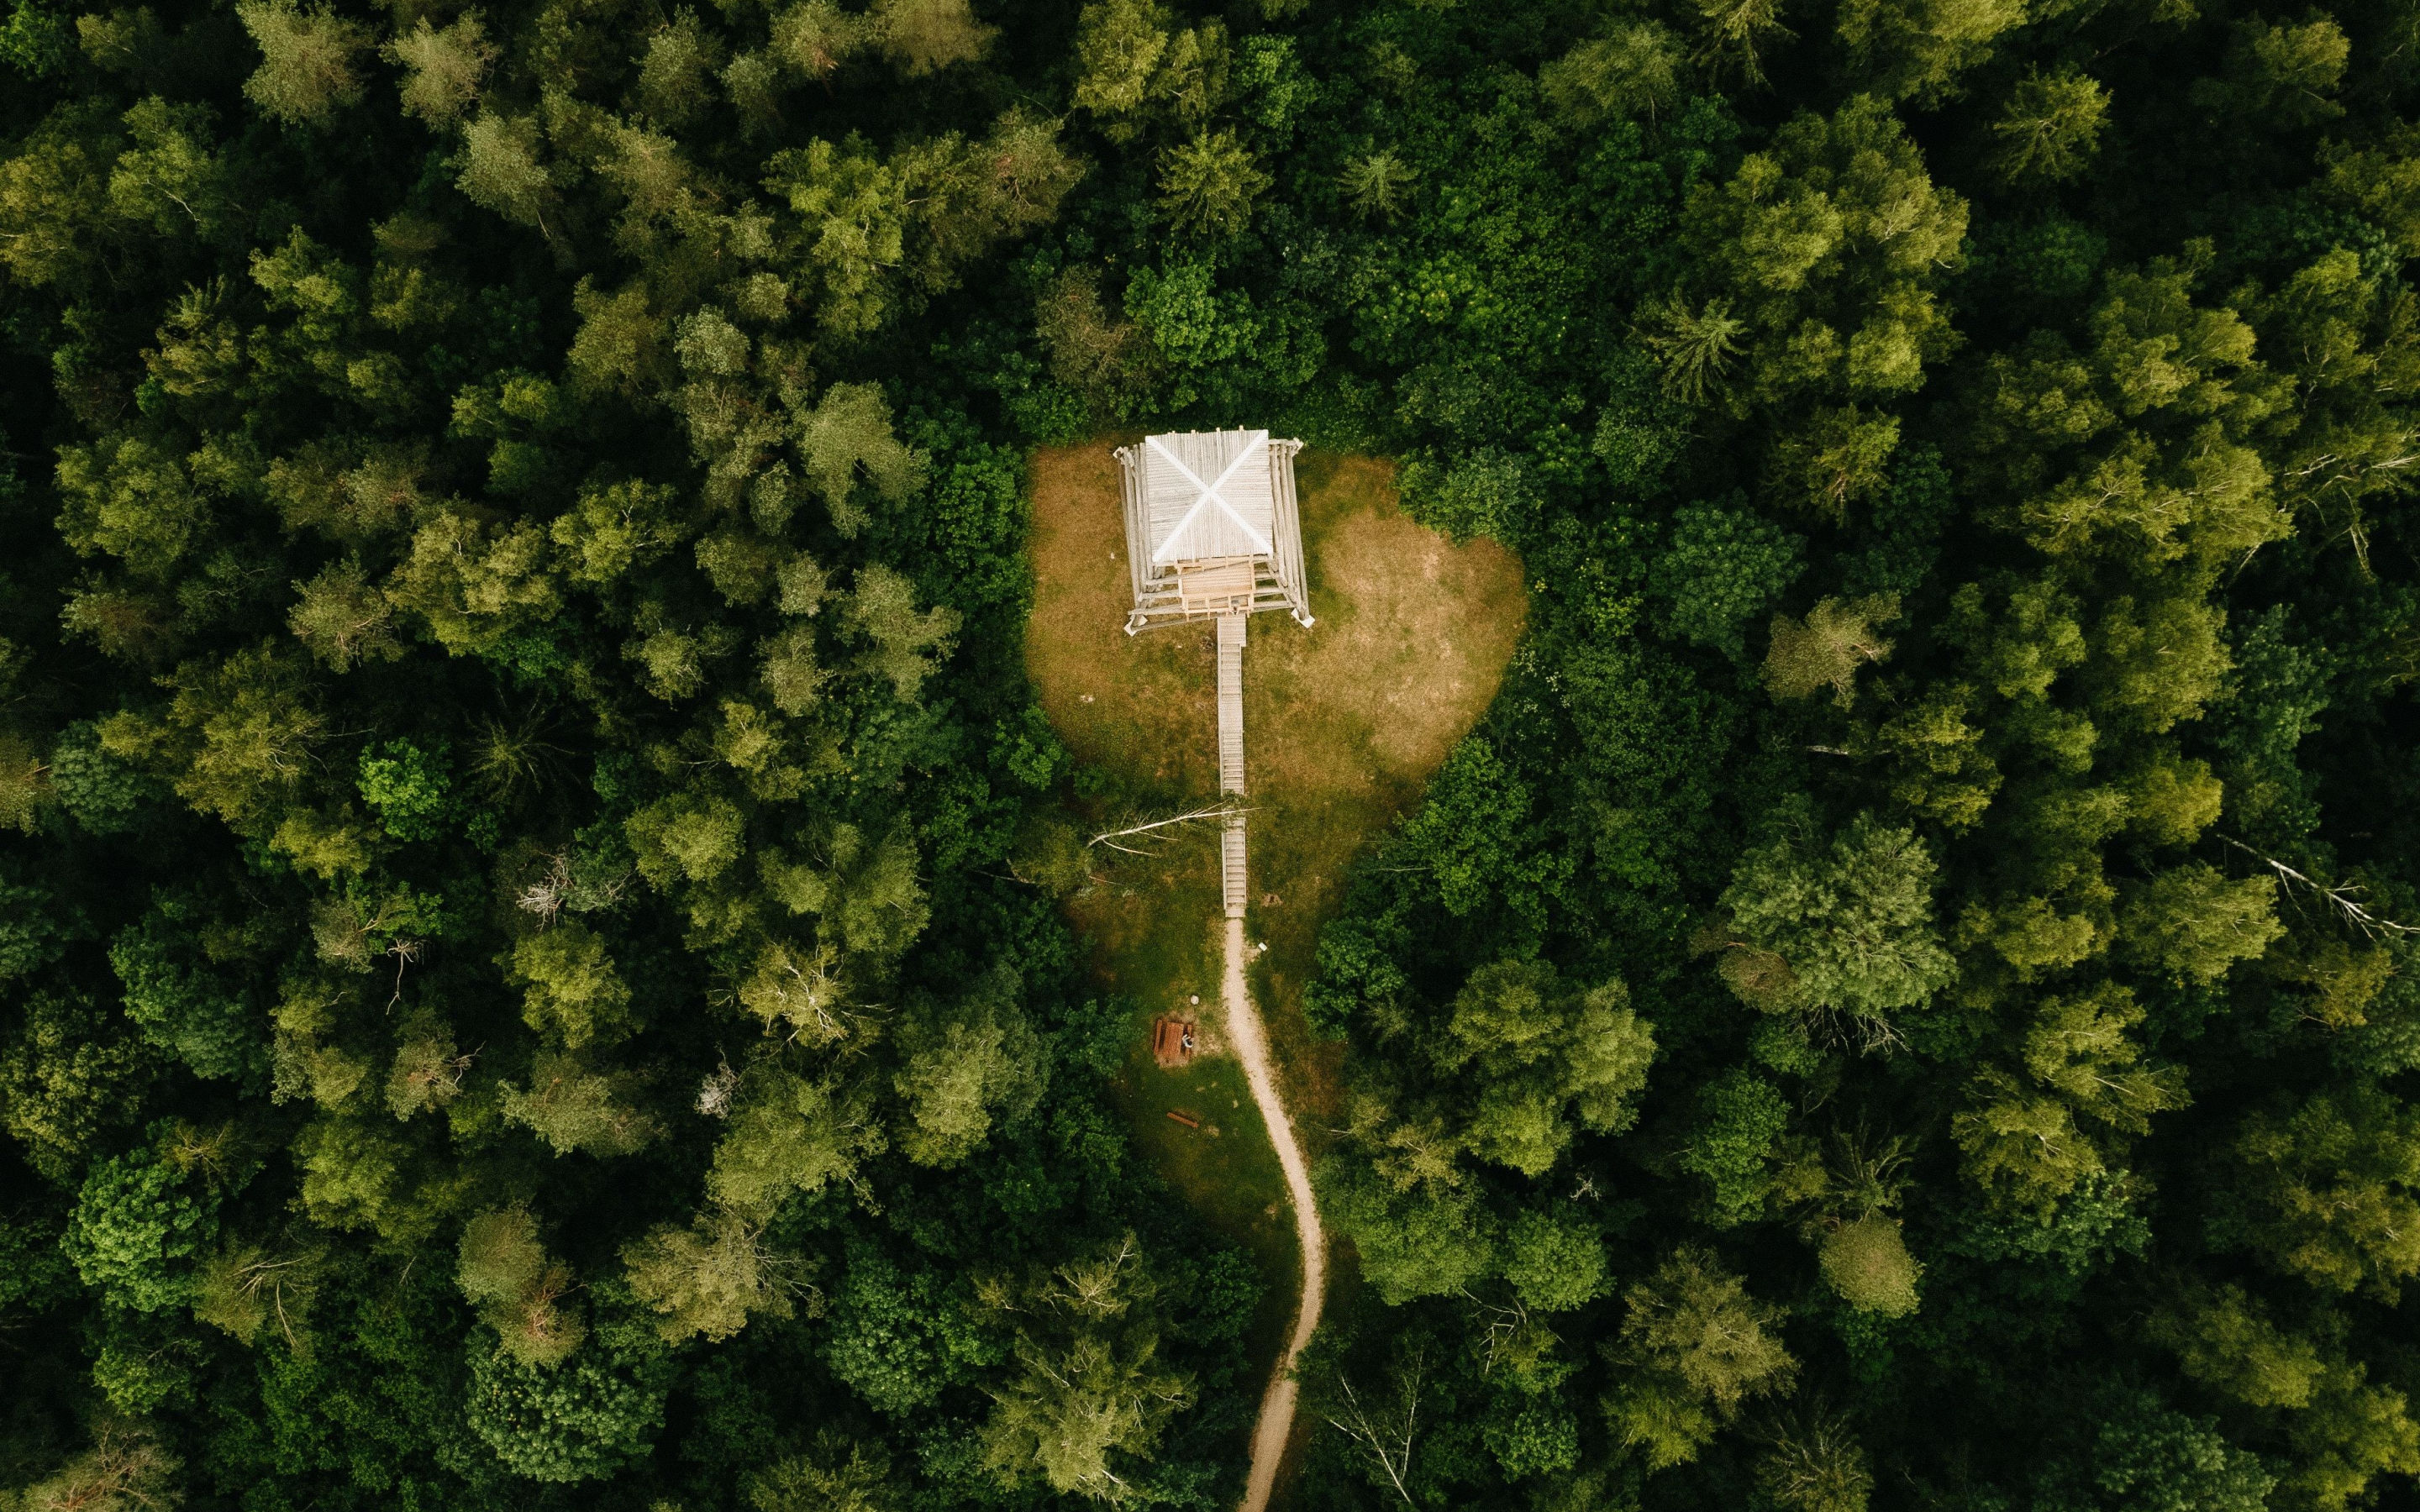 Hut, aerial view, road in forest, green trees, 2880x1800 wallpaper